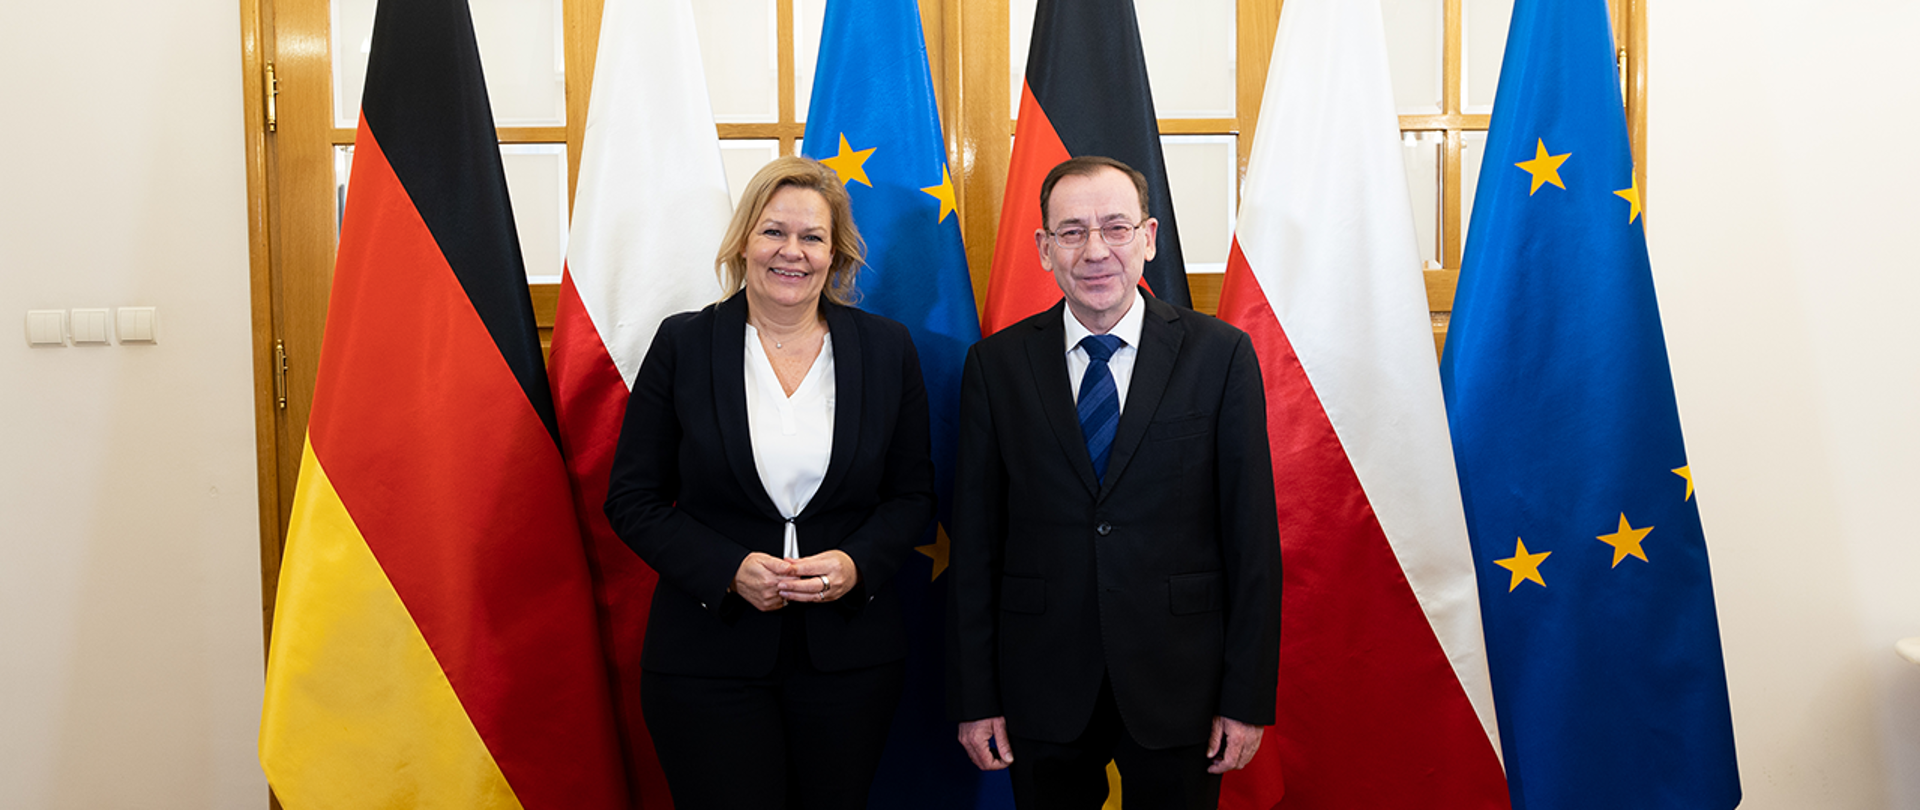 Meeting of Polish and German ministers of the interior